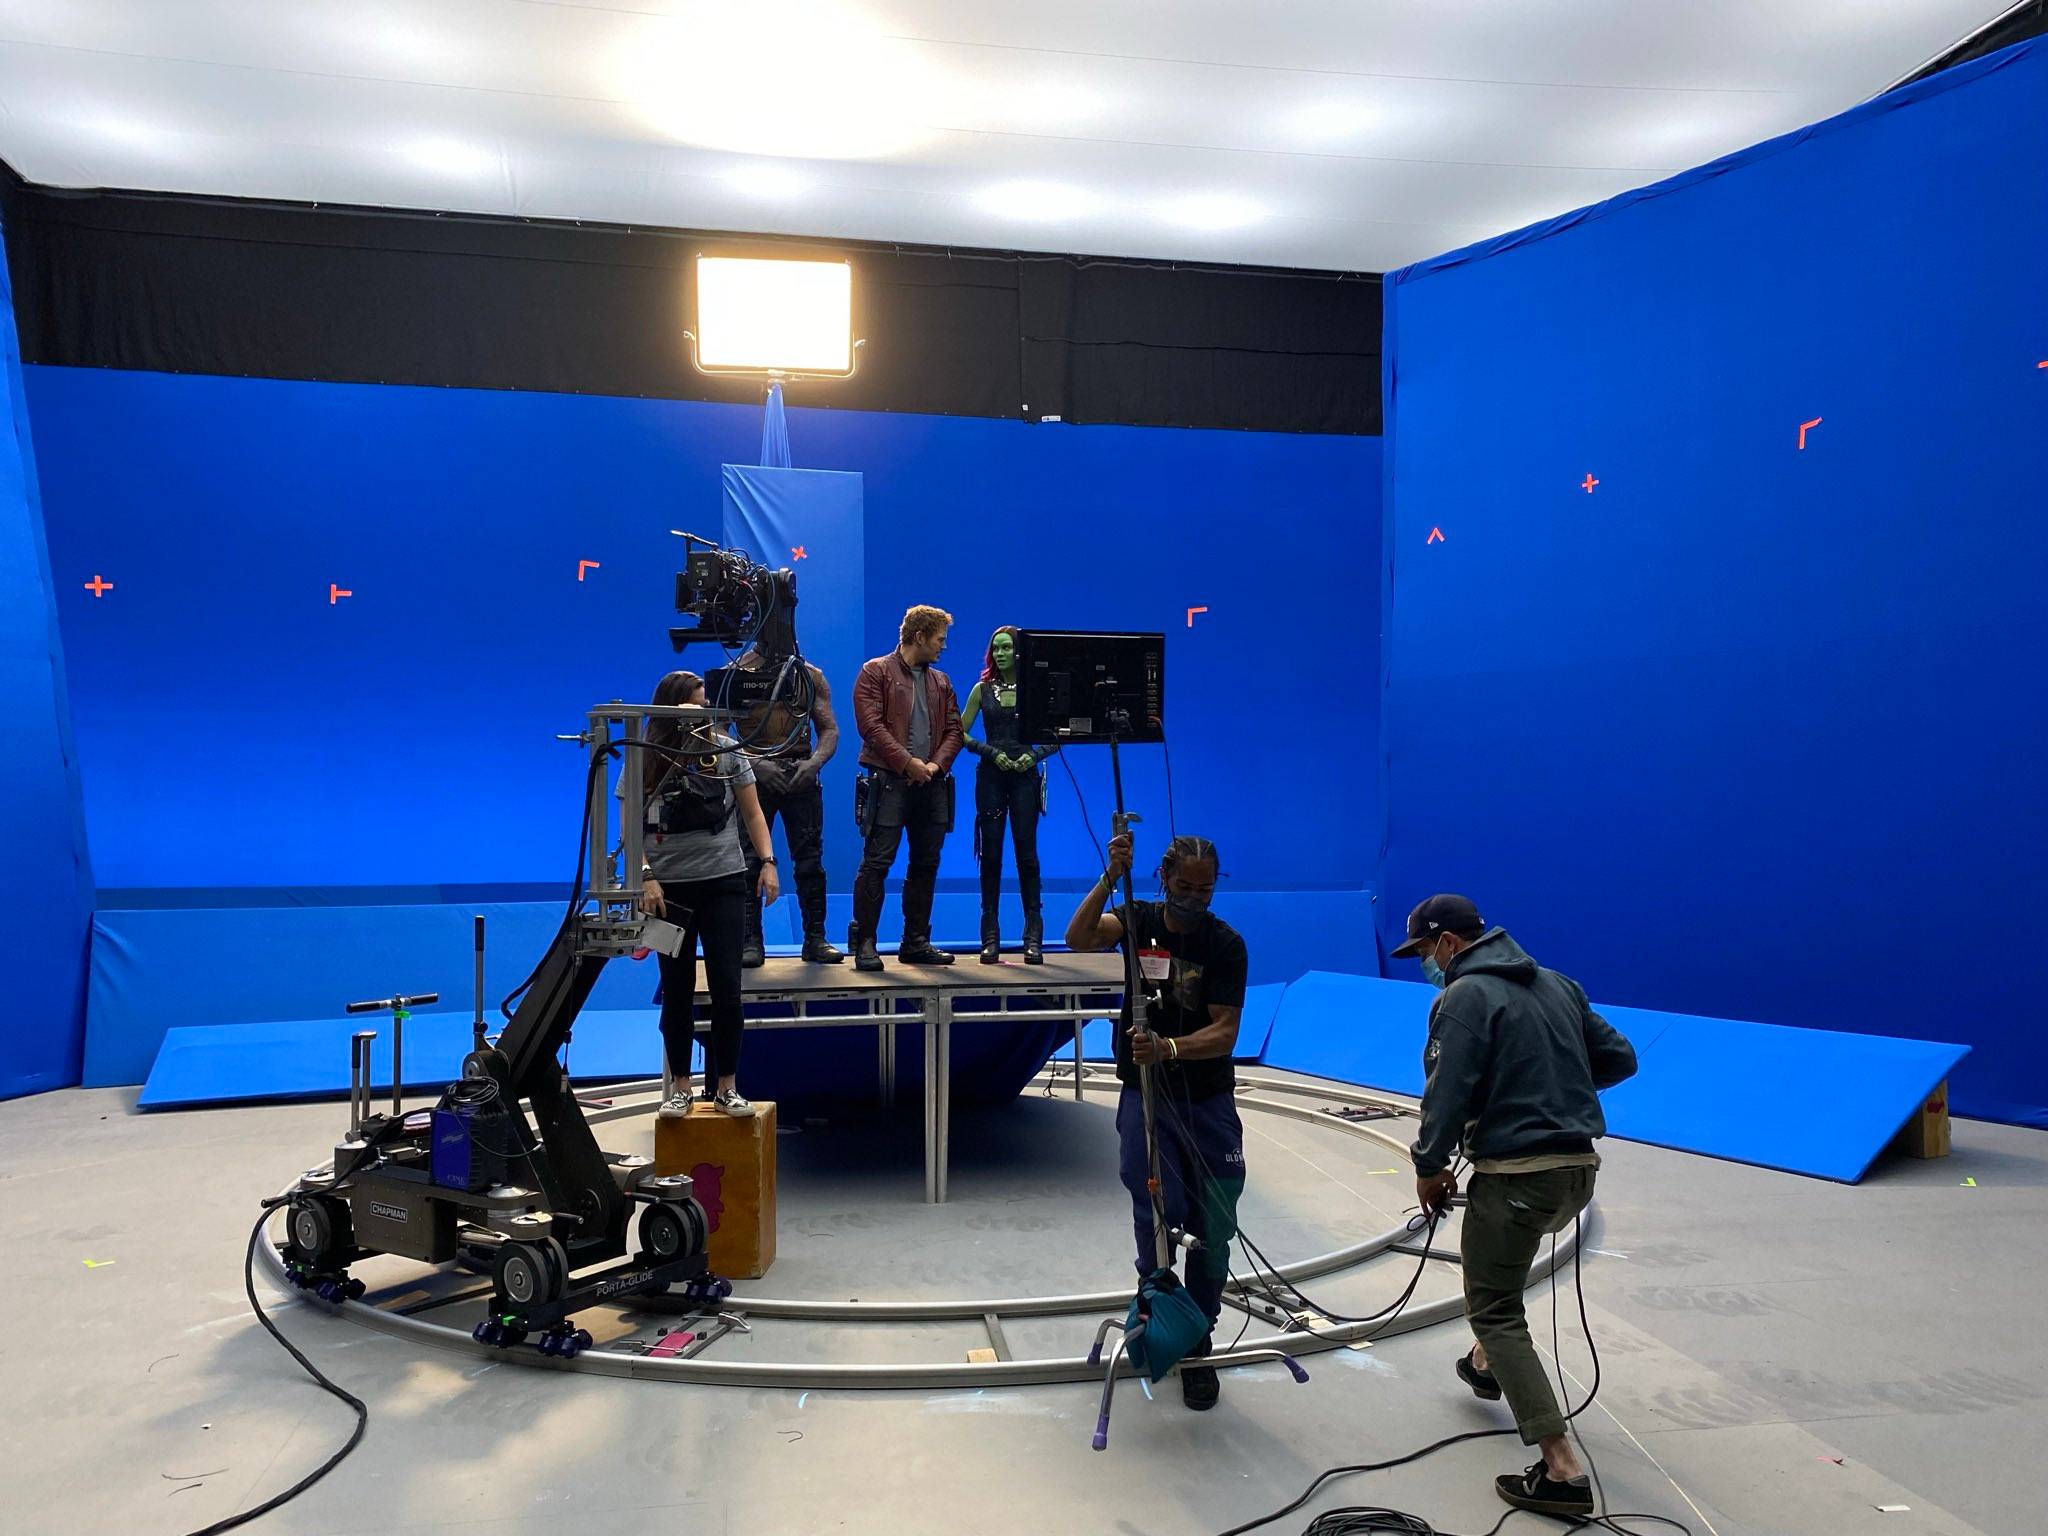 Director James Gunn shares behind-the-scenes photos shooting scenes for EPCOT's 'Guardians of the Galaxy Cosmic Rewind'